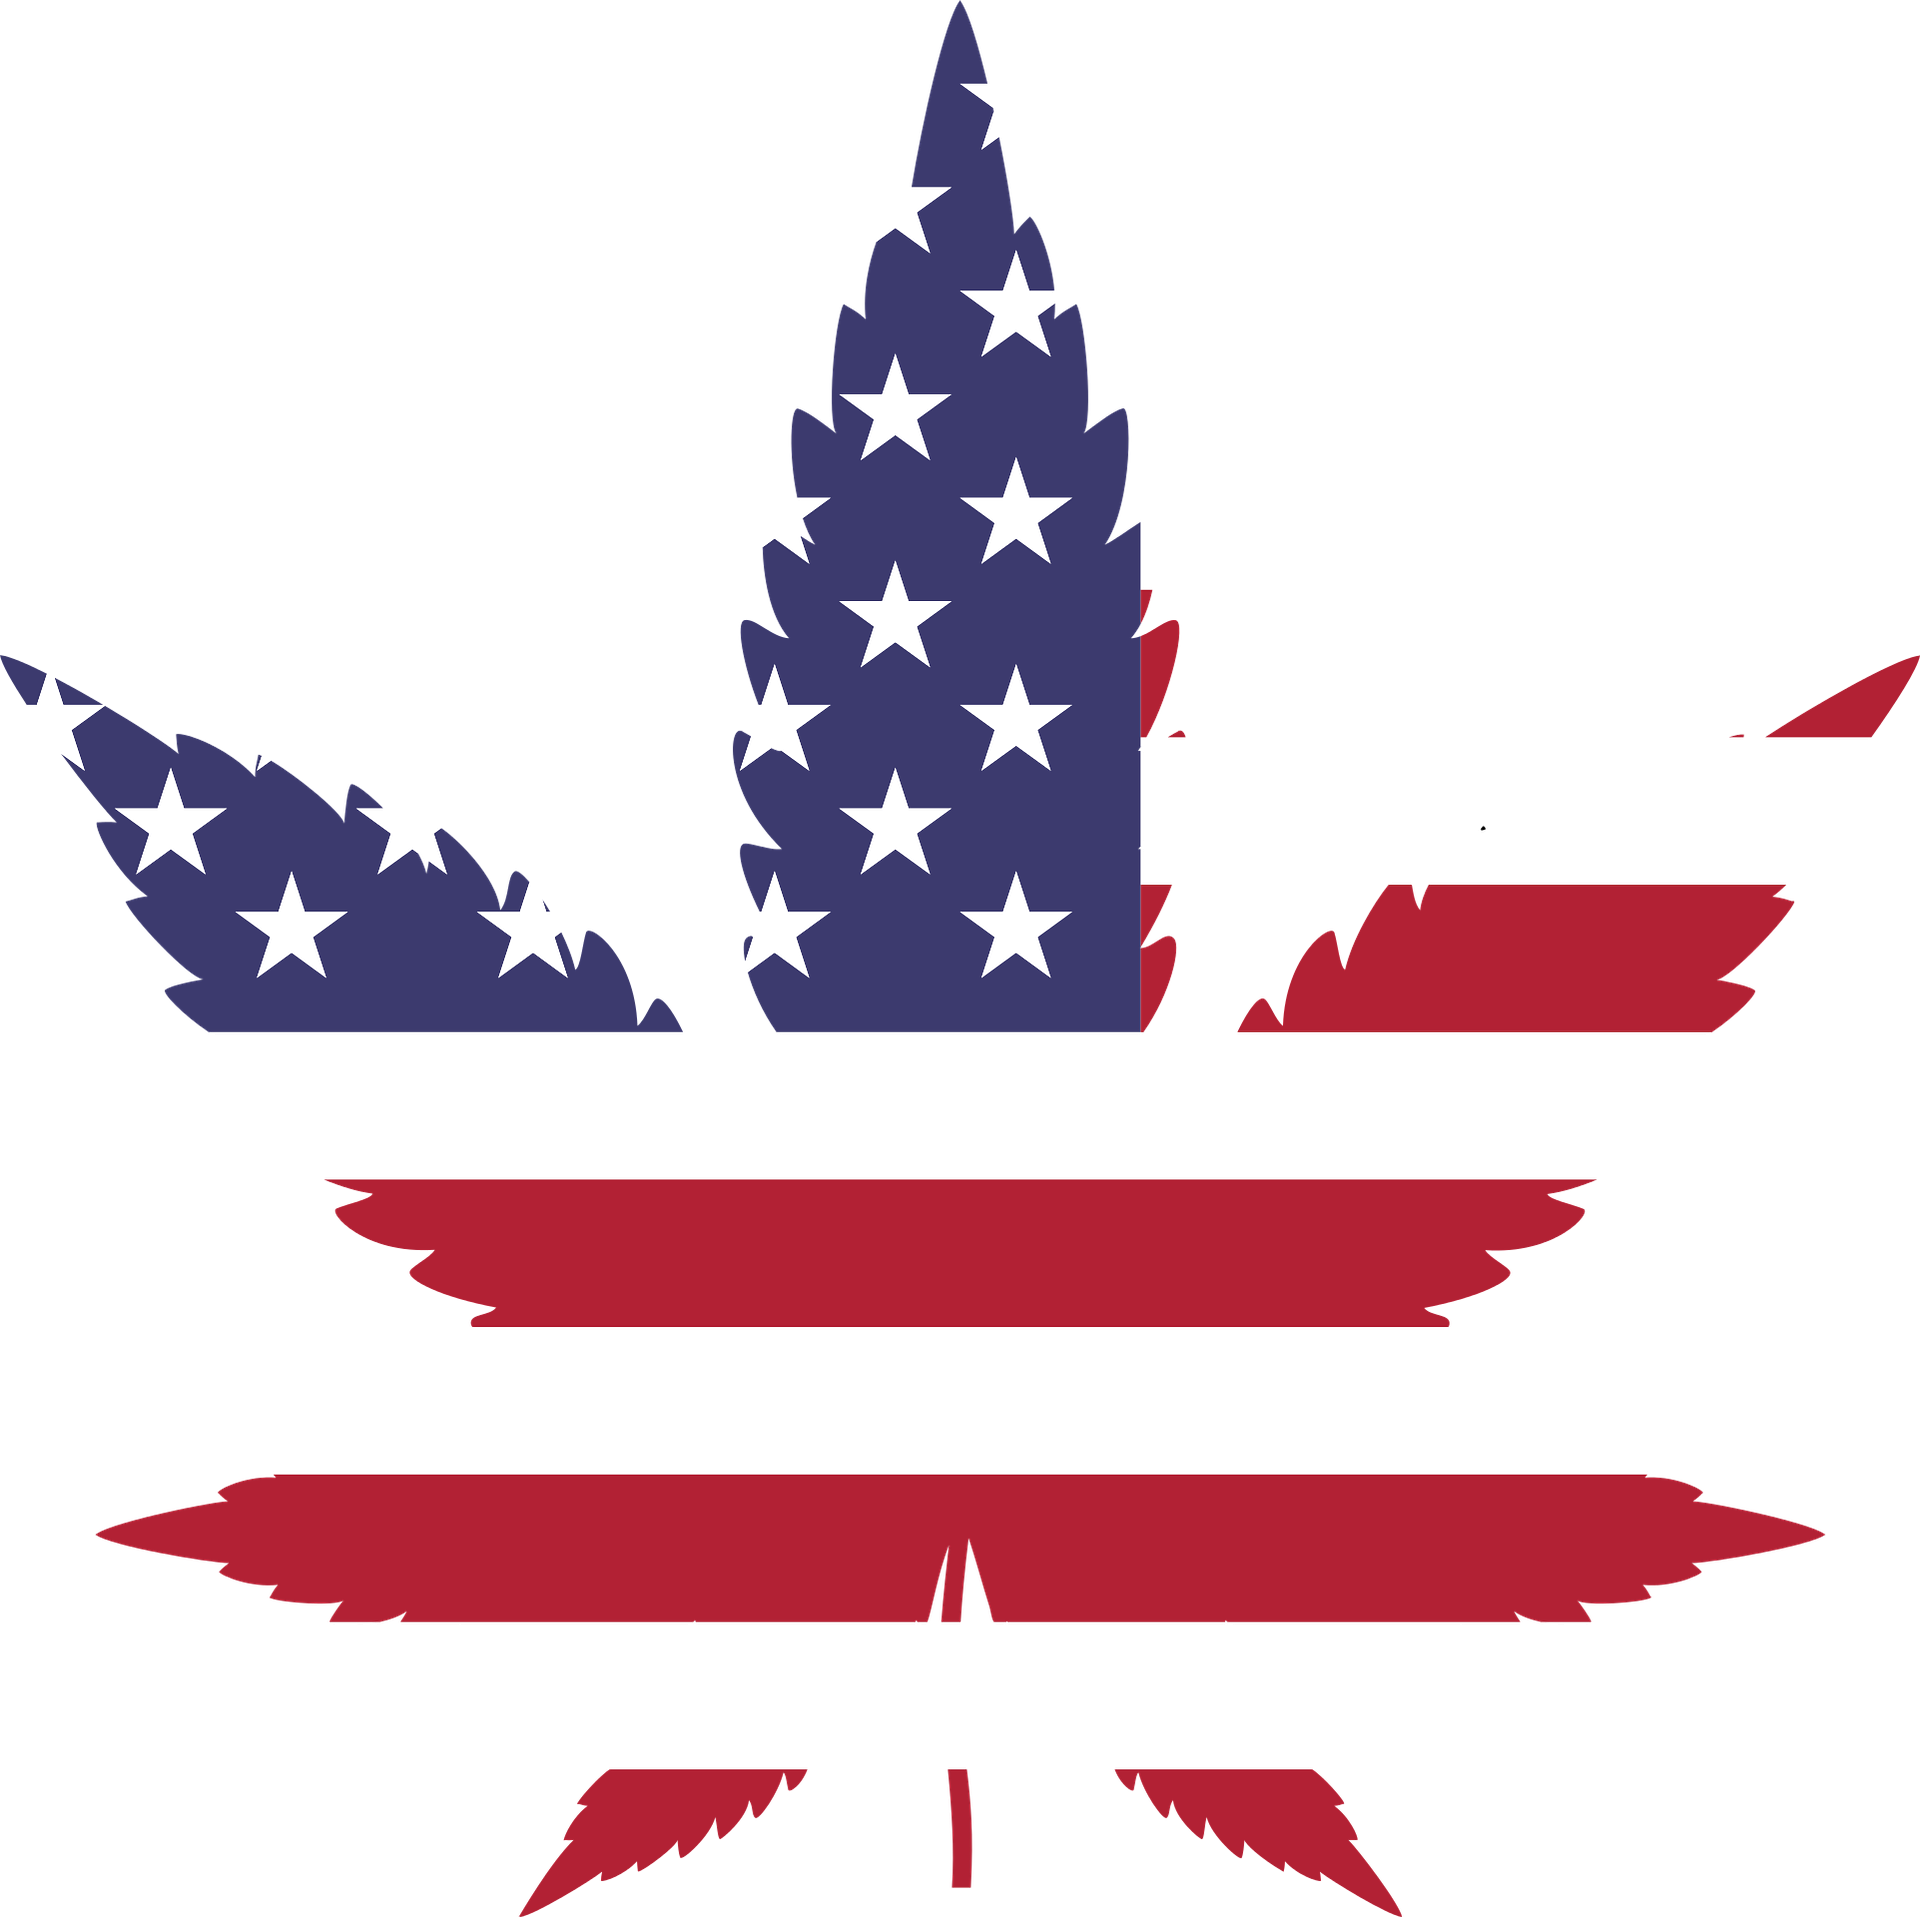 Want to weigh in on Marijuana legalization & decriminalization? Hurry up–you’ve got less than 3 hours!